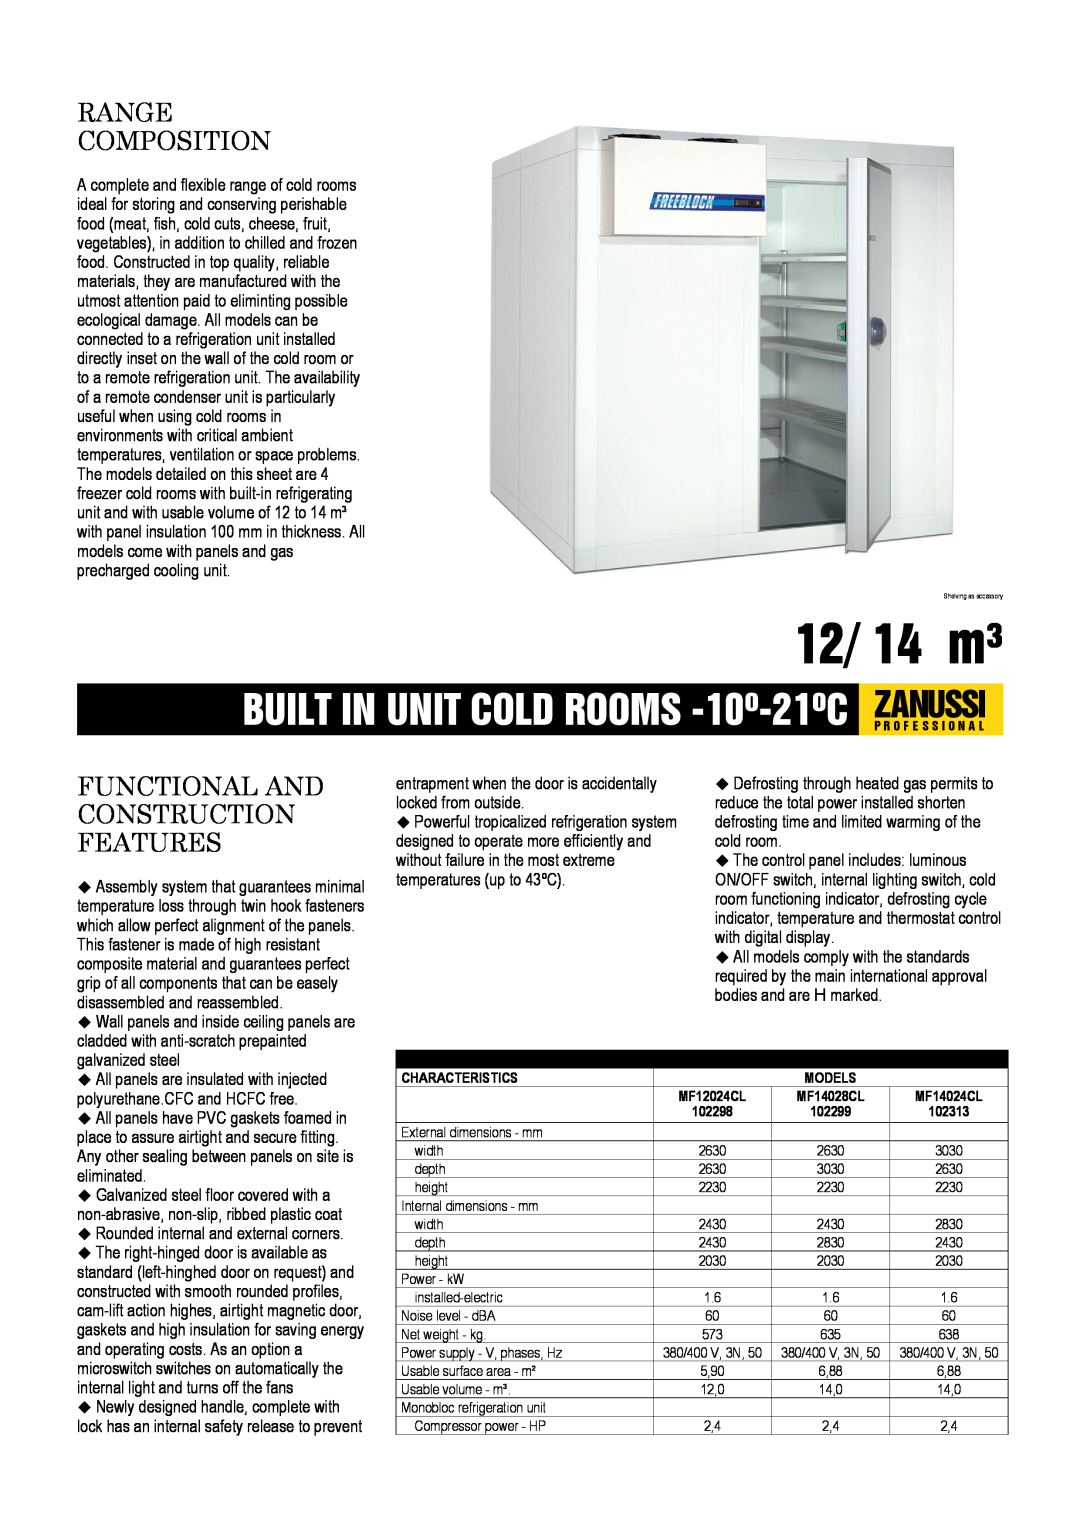 Zanussi MF14024CL, MF12024CL, MF14028CL dimensions 12/ 14 m³, Range Composition, Functional And Construction Features 